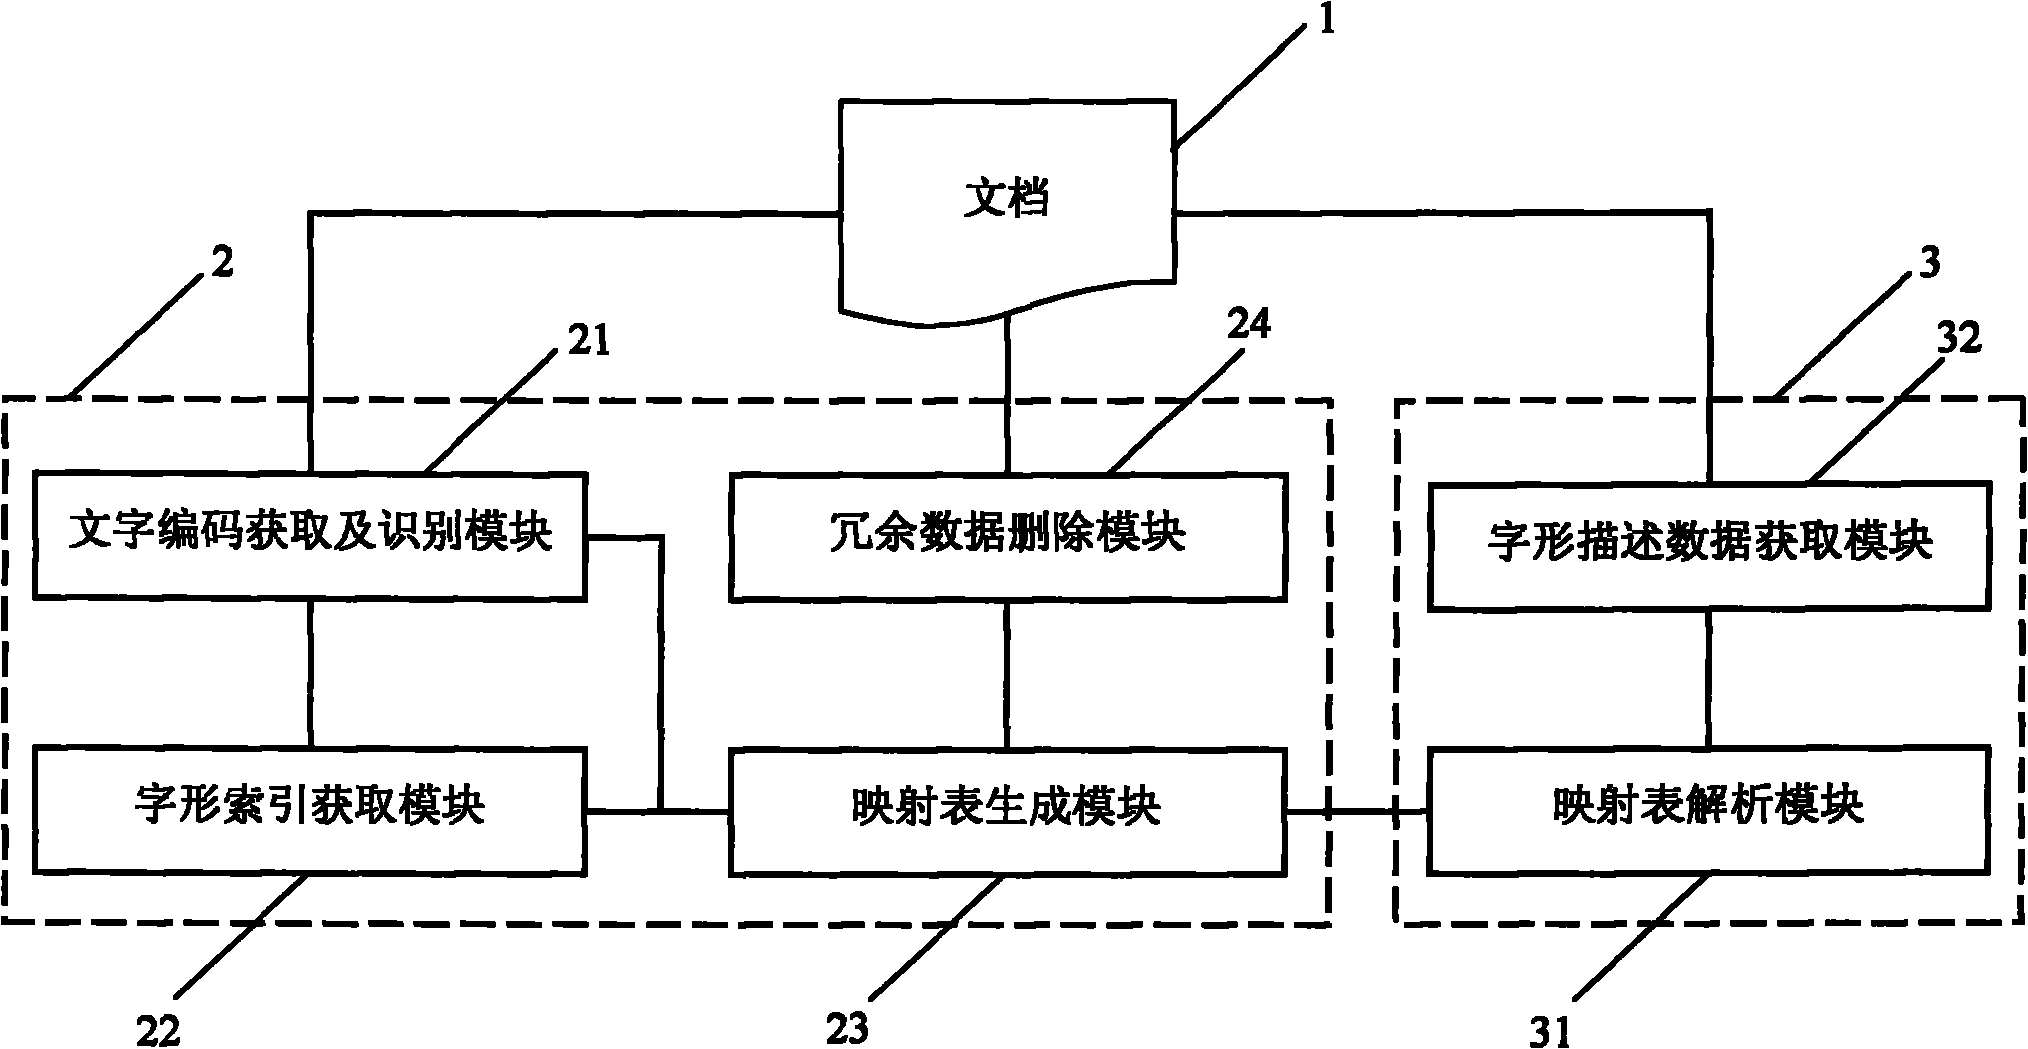 Method and system for processing script data